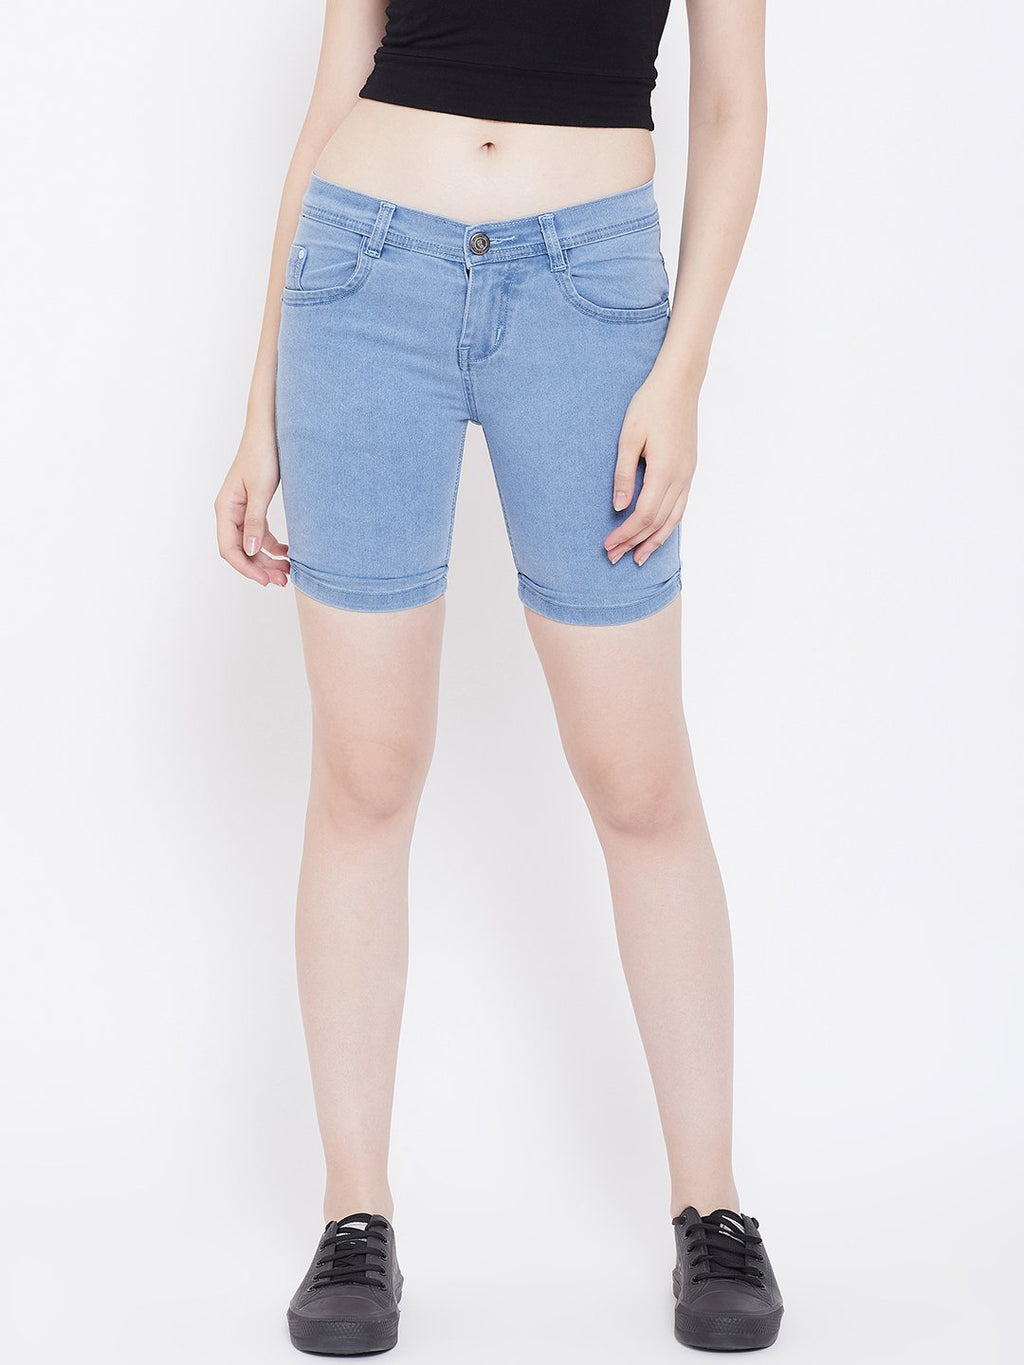 Slim Fit Stretchable Sky Blue Shorts - NiftyJeans